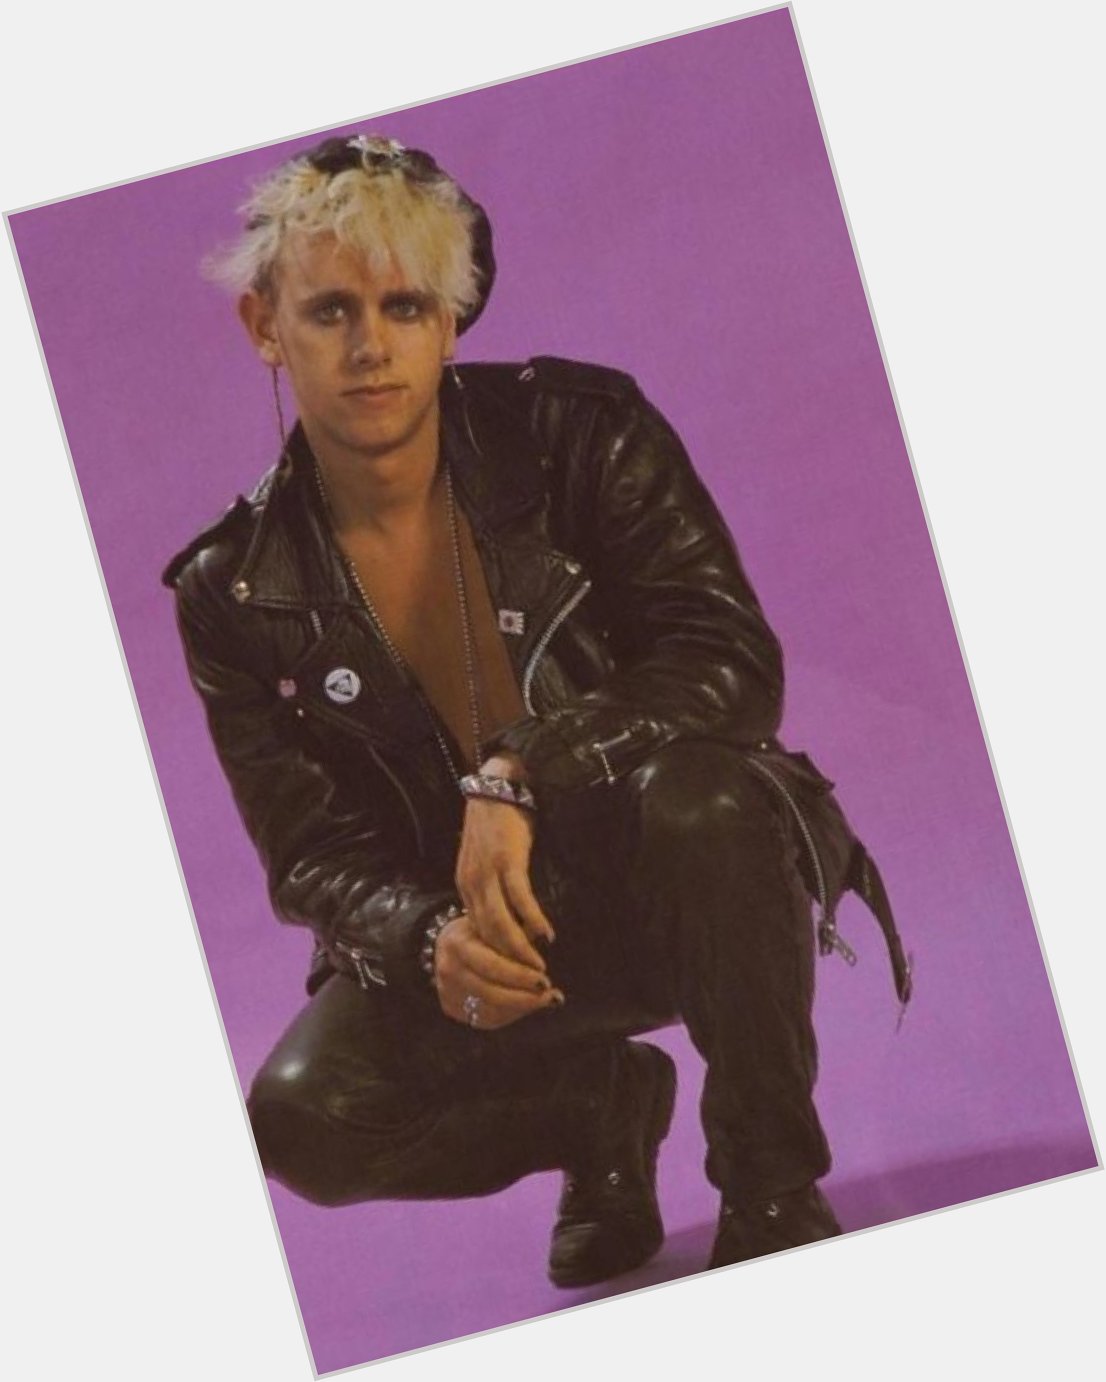 Happy birthday to my favourite dilf martin gore, have a great day  